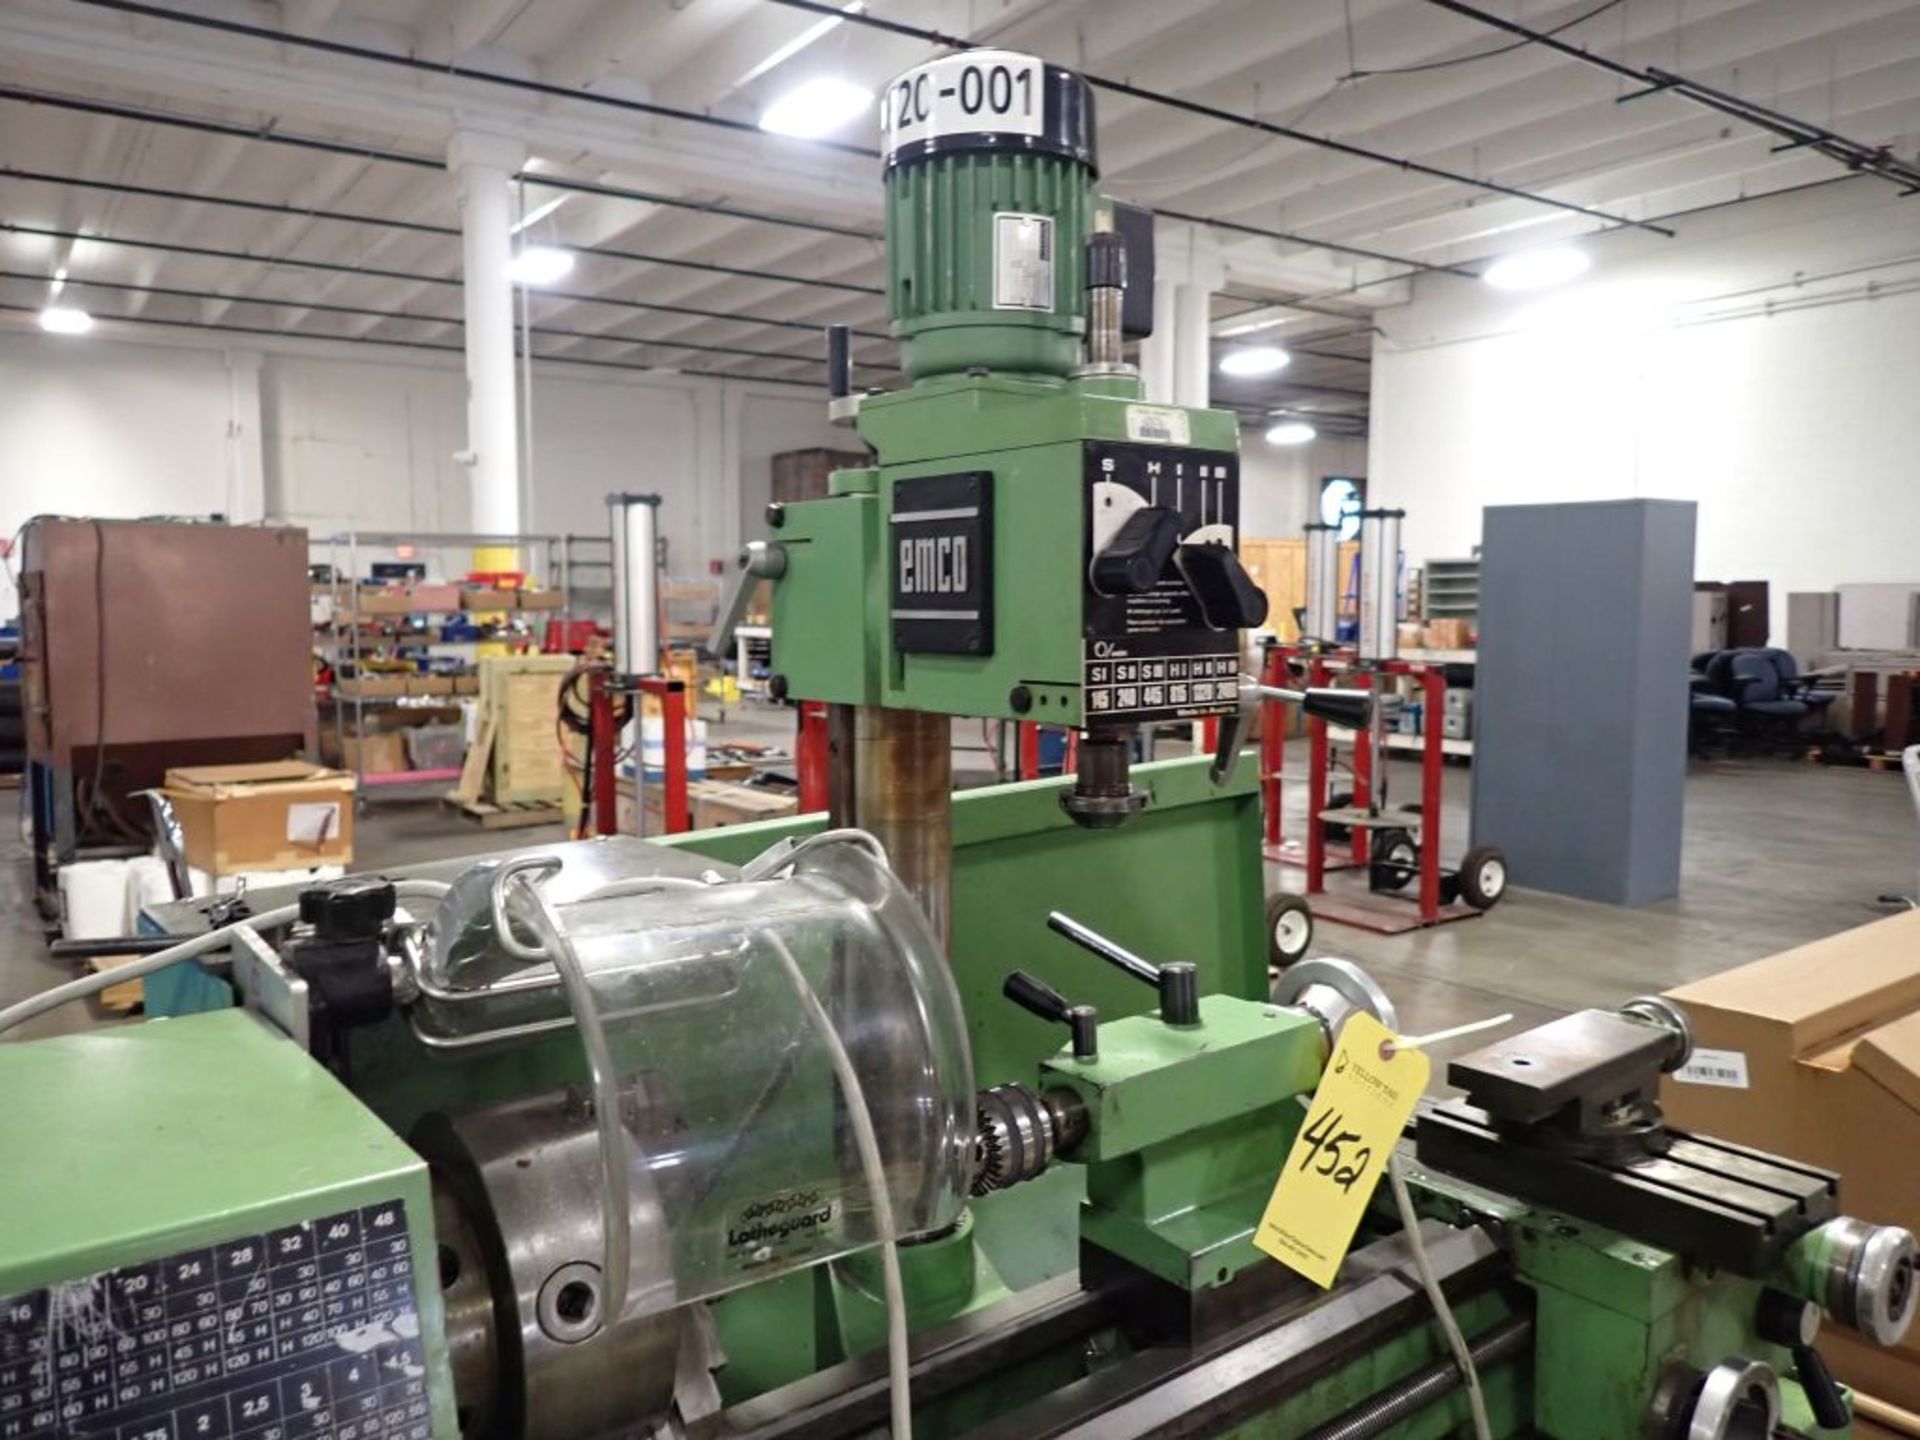 EMCO Compact 10 Lathe/Mill | 10 x 24 Swing; Mill Head; 3-Jaw Chuck; Tag: 241452 | Limited Forklift - Image 4 of 7